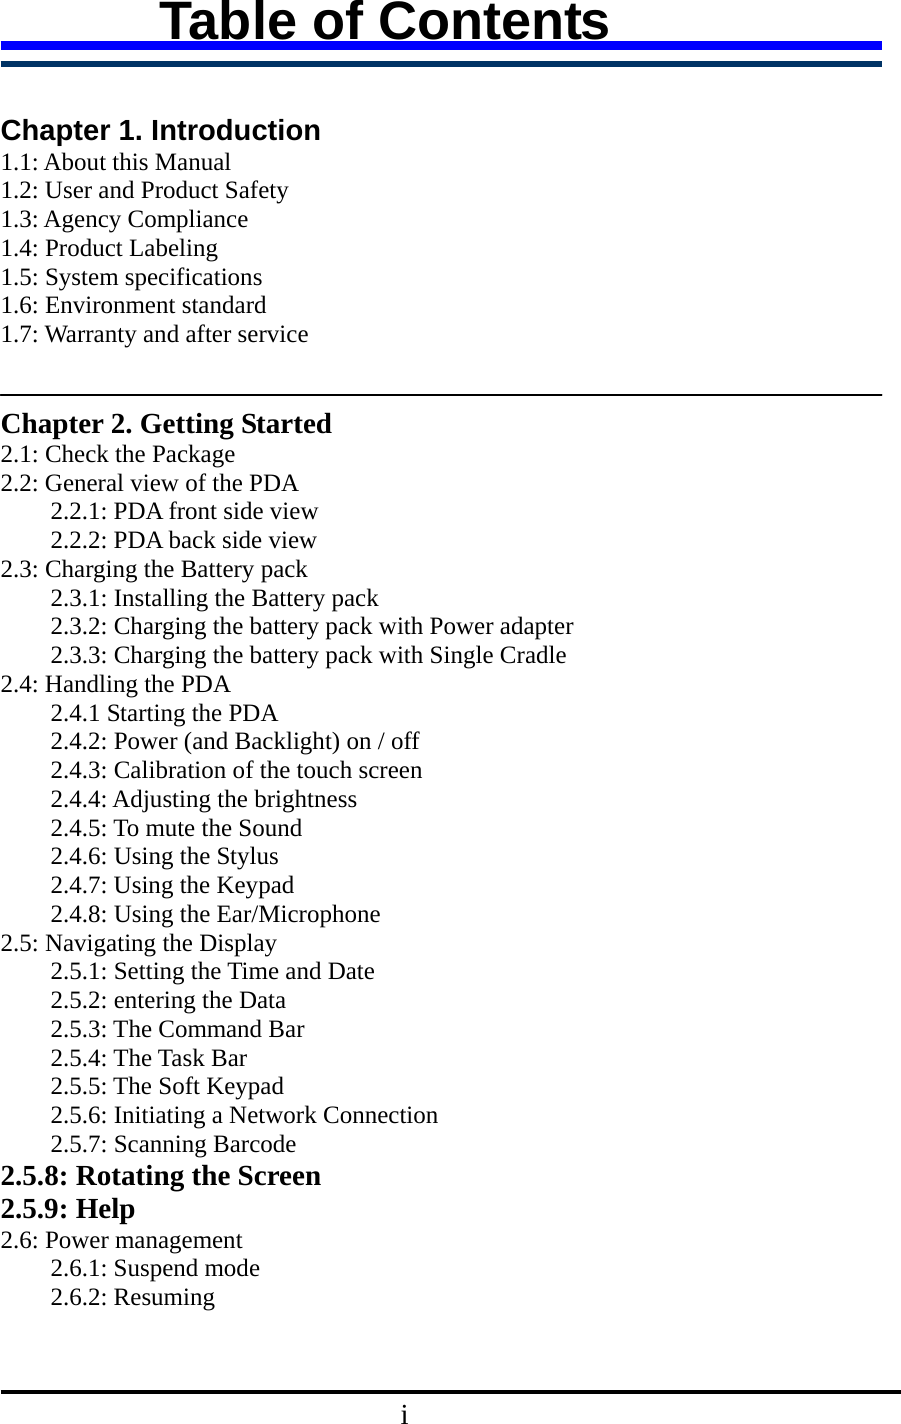 Table of Contents    Chapter 1. Introduction   1.1: About this Manual 1.2: User and Product Safety 1.3: Agency Compliance 1.4: Product Labeling 1.5: System specifications 1.6: Environment standard 1.7: Warranty and after service     Chapter 2. Getting Started 2.1: Check the Package 2.2: General view of the PDA   2.2.1: PDA front side view   2.2.2: PDA back side view 2.3: Charging the Battery pack   2.3.1: Installing the Battery pack   2.3.2: Charging the battery pack with Power adapter   2.3.3: Charging the battery pack with Single Cradle 2.4: Handling the PDA     2.4.1 Starting the PDA 2.4.2: Power (and Backlight) on / off   2.4.3: Calibration of the touch screen 2.4.4: Adjusting the brightness 2.4.5: To mute the Sound 2.4.6: Using the Stylus 2.4.7: Using the Keypad 2.4.8: Using the Ear/Microphone   2.5: Navigating the Display 2.5.1: Setting the Time and Date 2.5.2: entering the Data 2.5.3: The Command Bar 2.5.4: The Task Bar 2.5.5: The Soft Keypad 2.5.6: Initiating a Network Connection 2.5.7: Scanning Barcode 2.5.8: Rotating the Screen 2.5.9: Help   2.6: Power management   2.6.1: Suspend mode 2.6.2: Resuming                                    i 